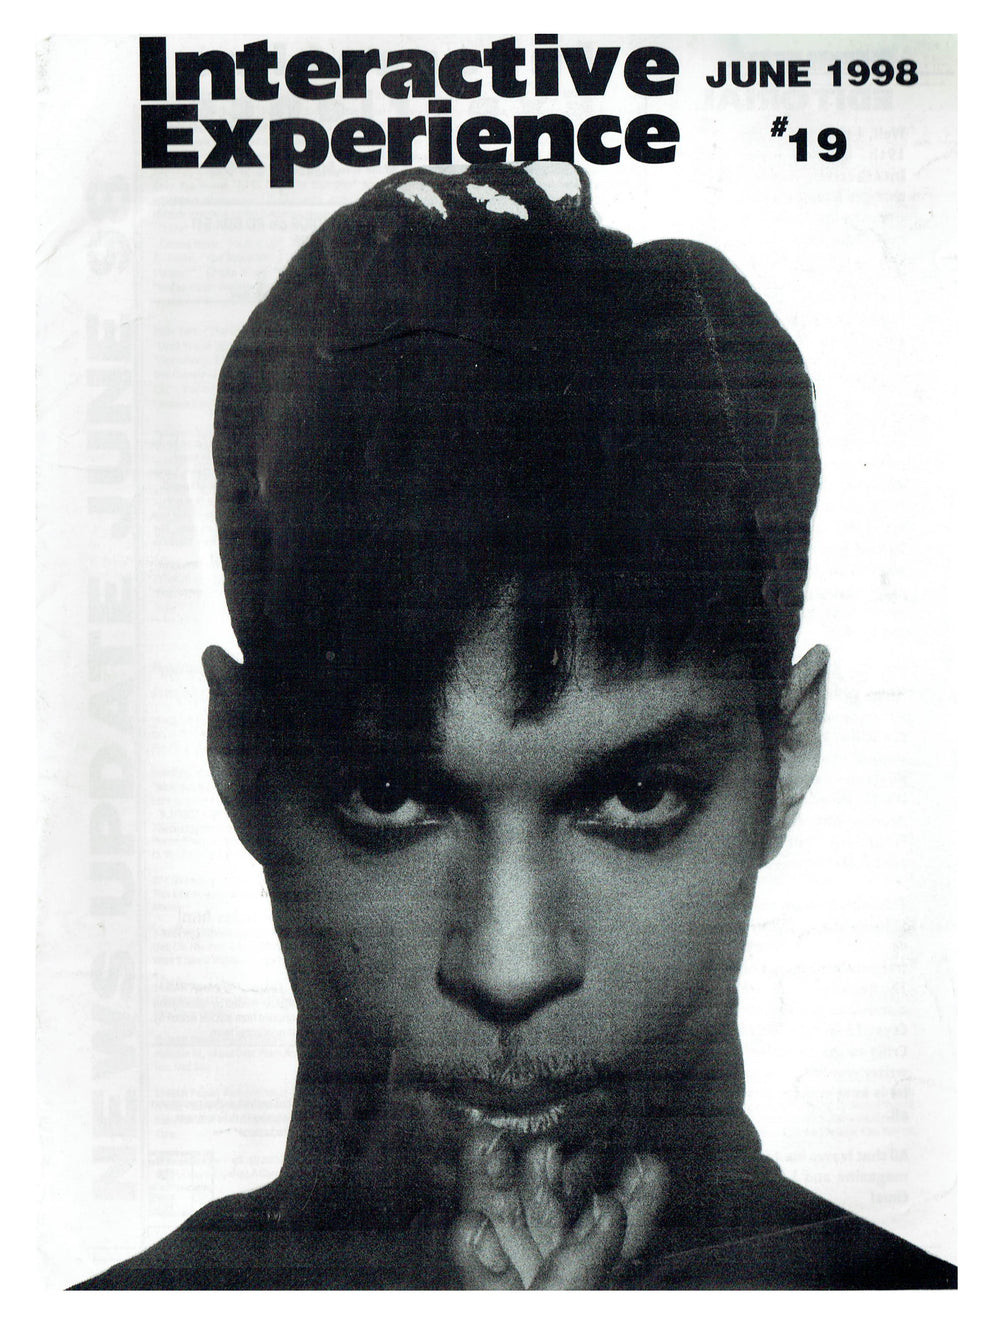 Prince – Interactive Experience Prince Fanzine Publication Issue 19 June 1998